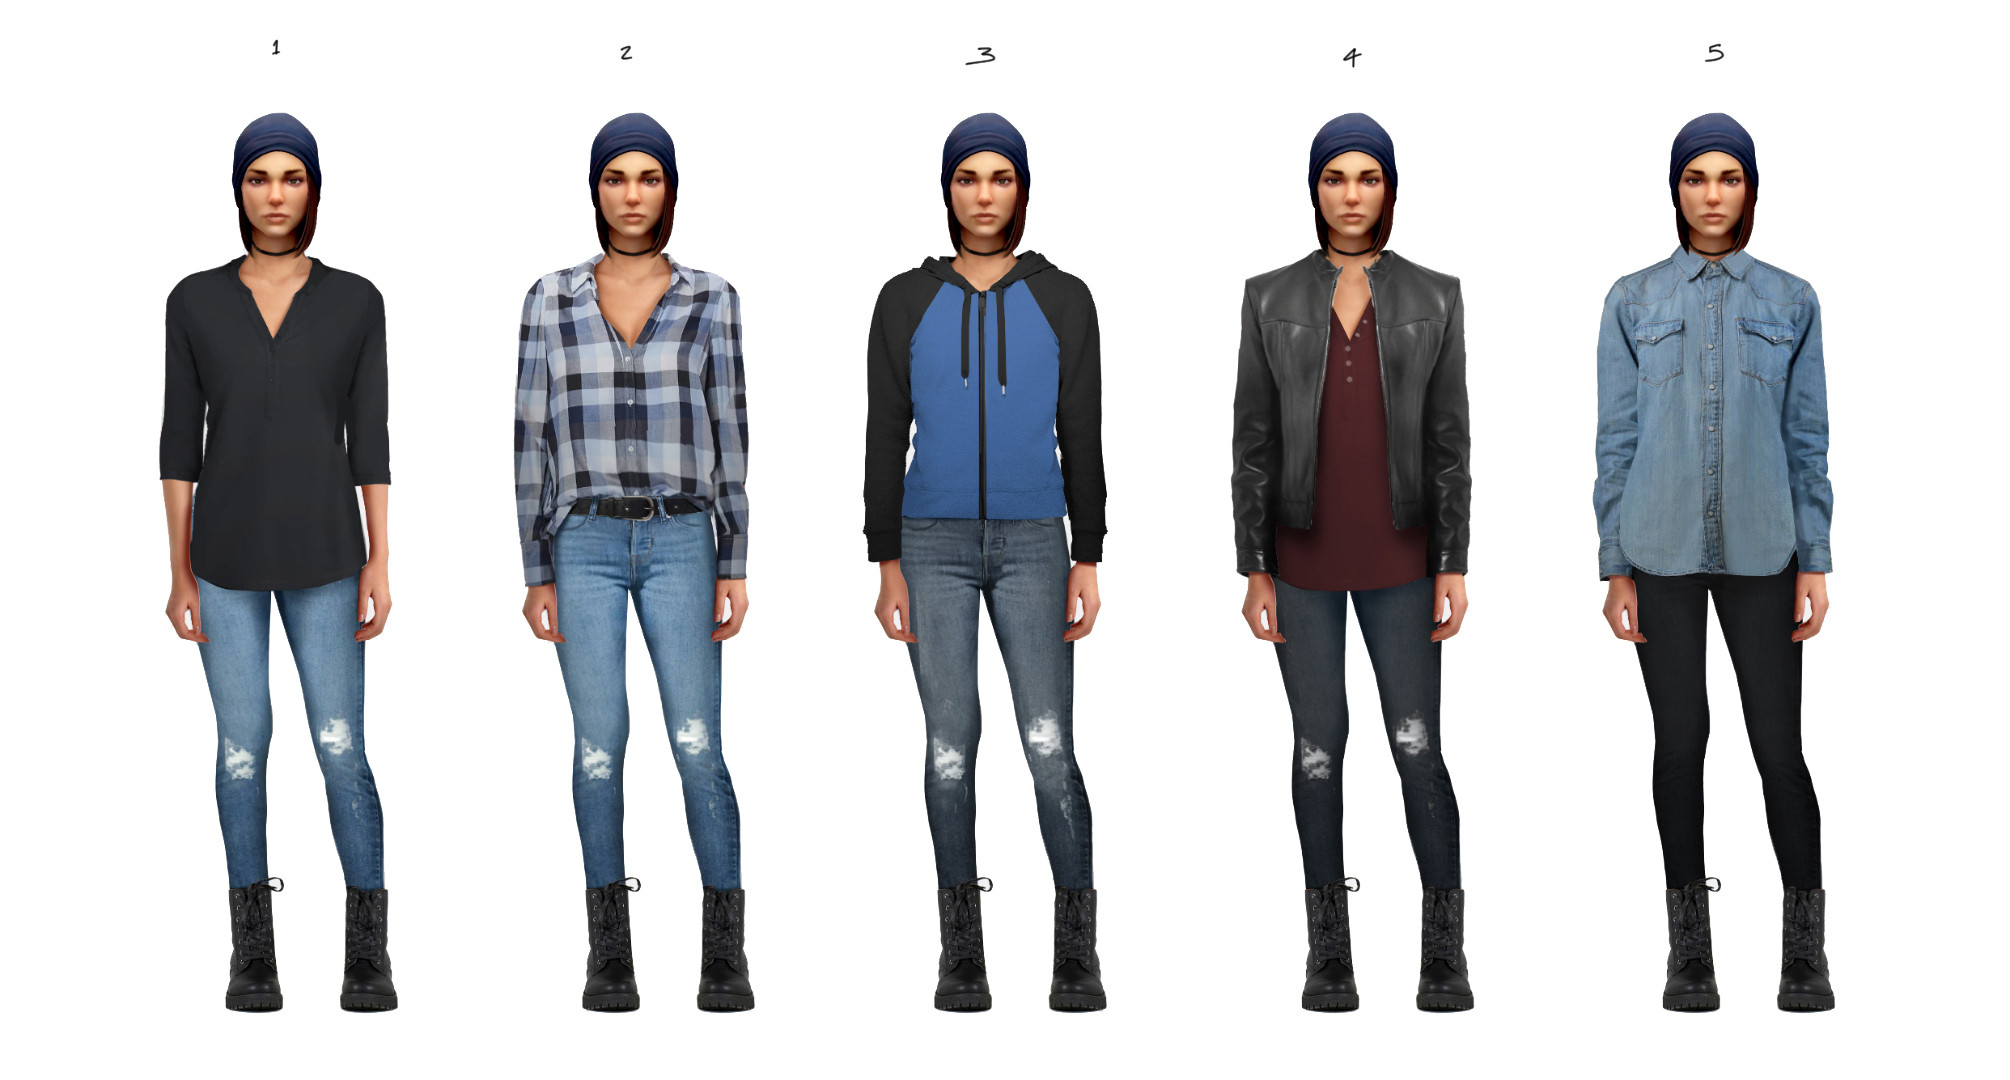 Wavelengths DLC - Fall Outfit Options 1